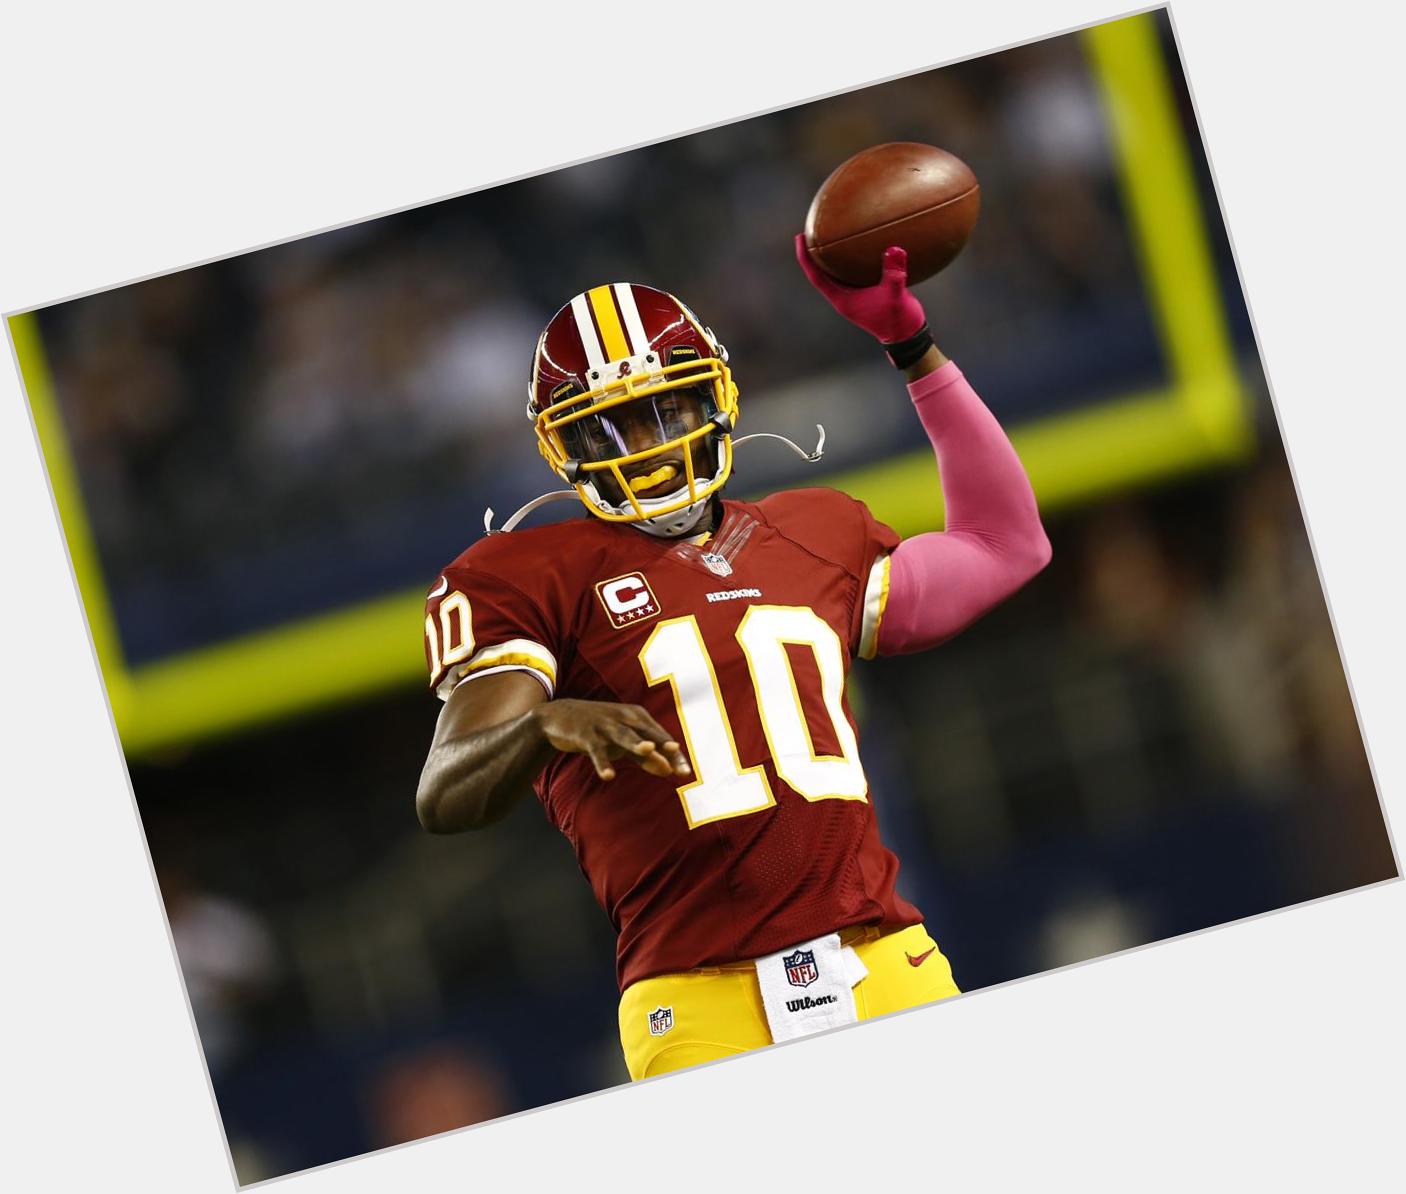 Happy Birthday to Robert Griffin III, who turns 25 today! 